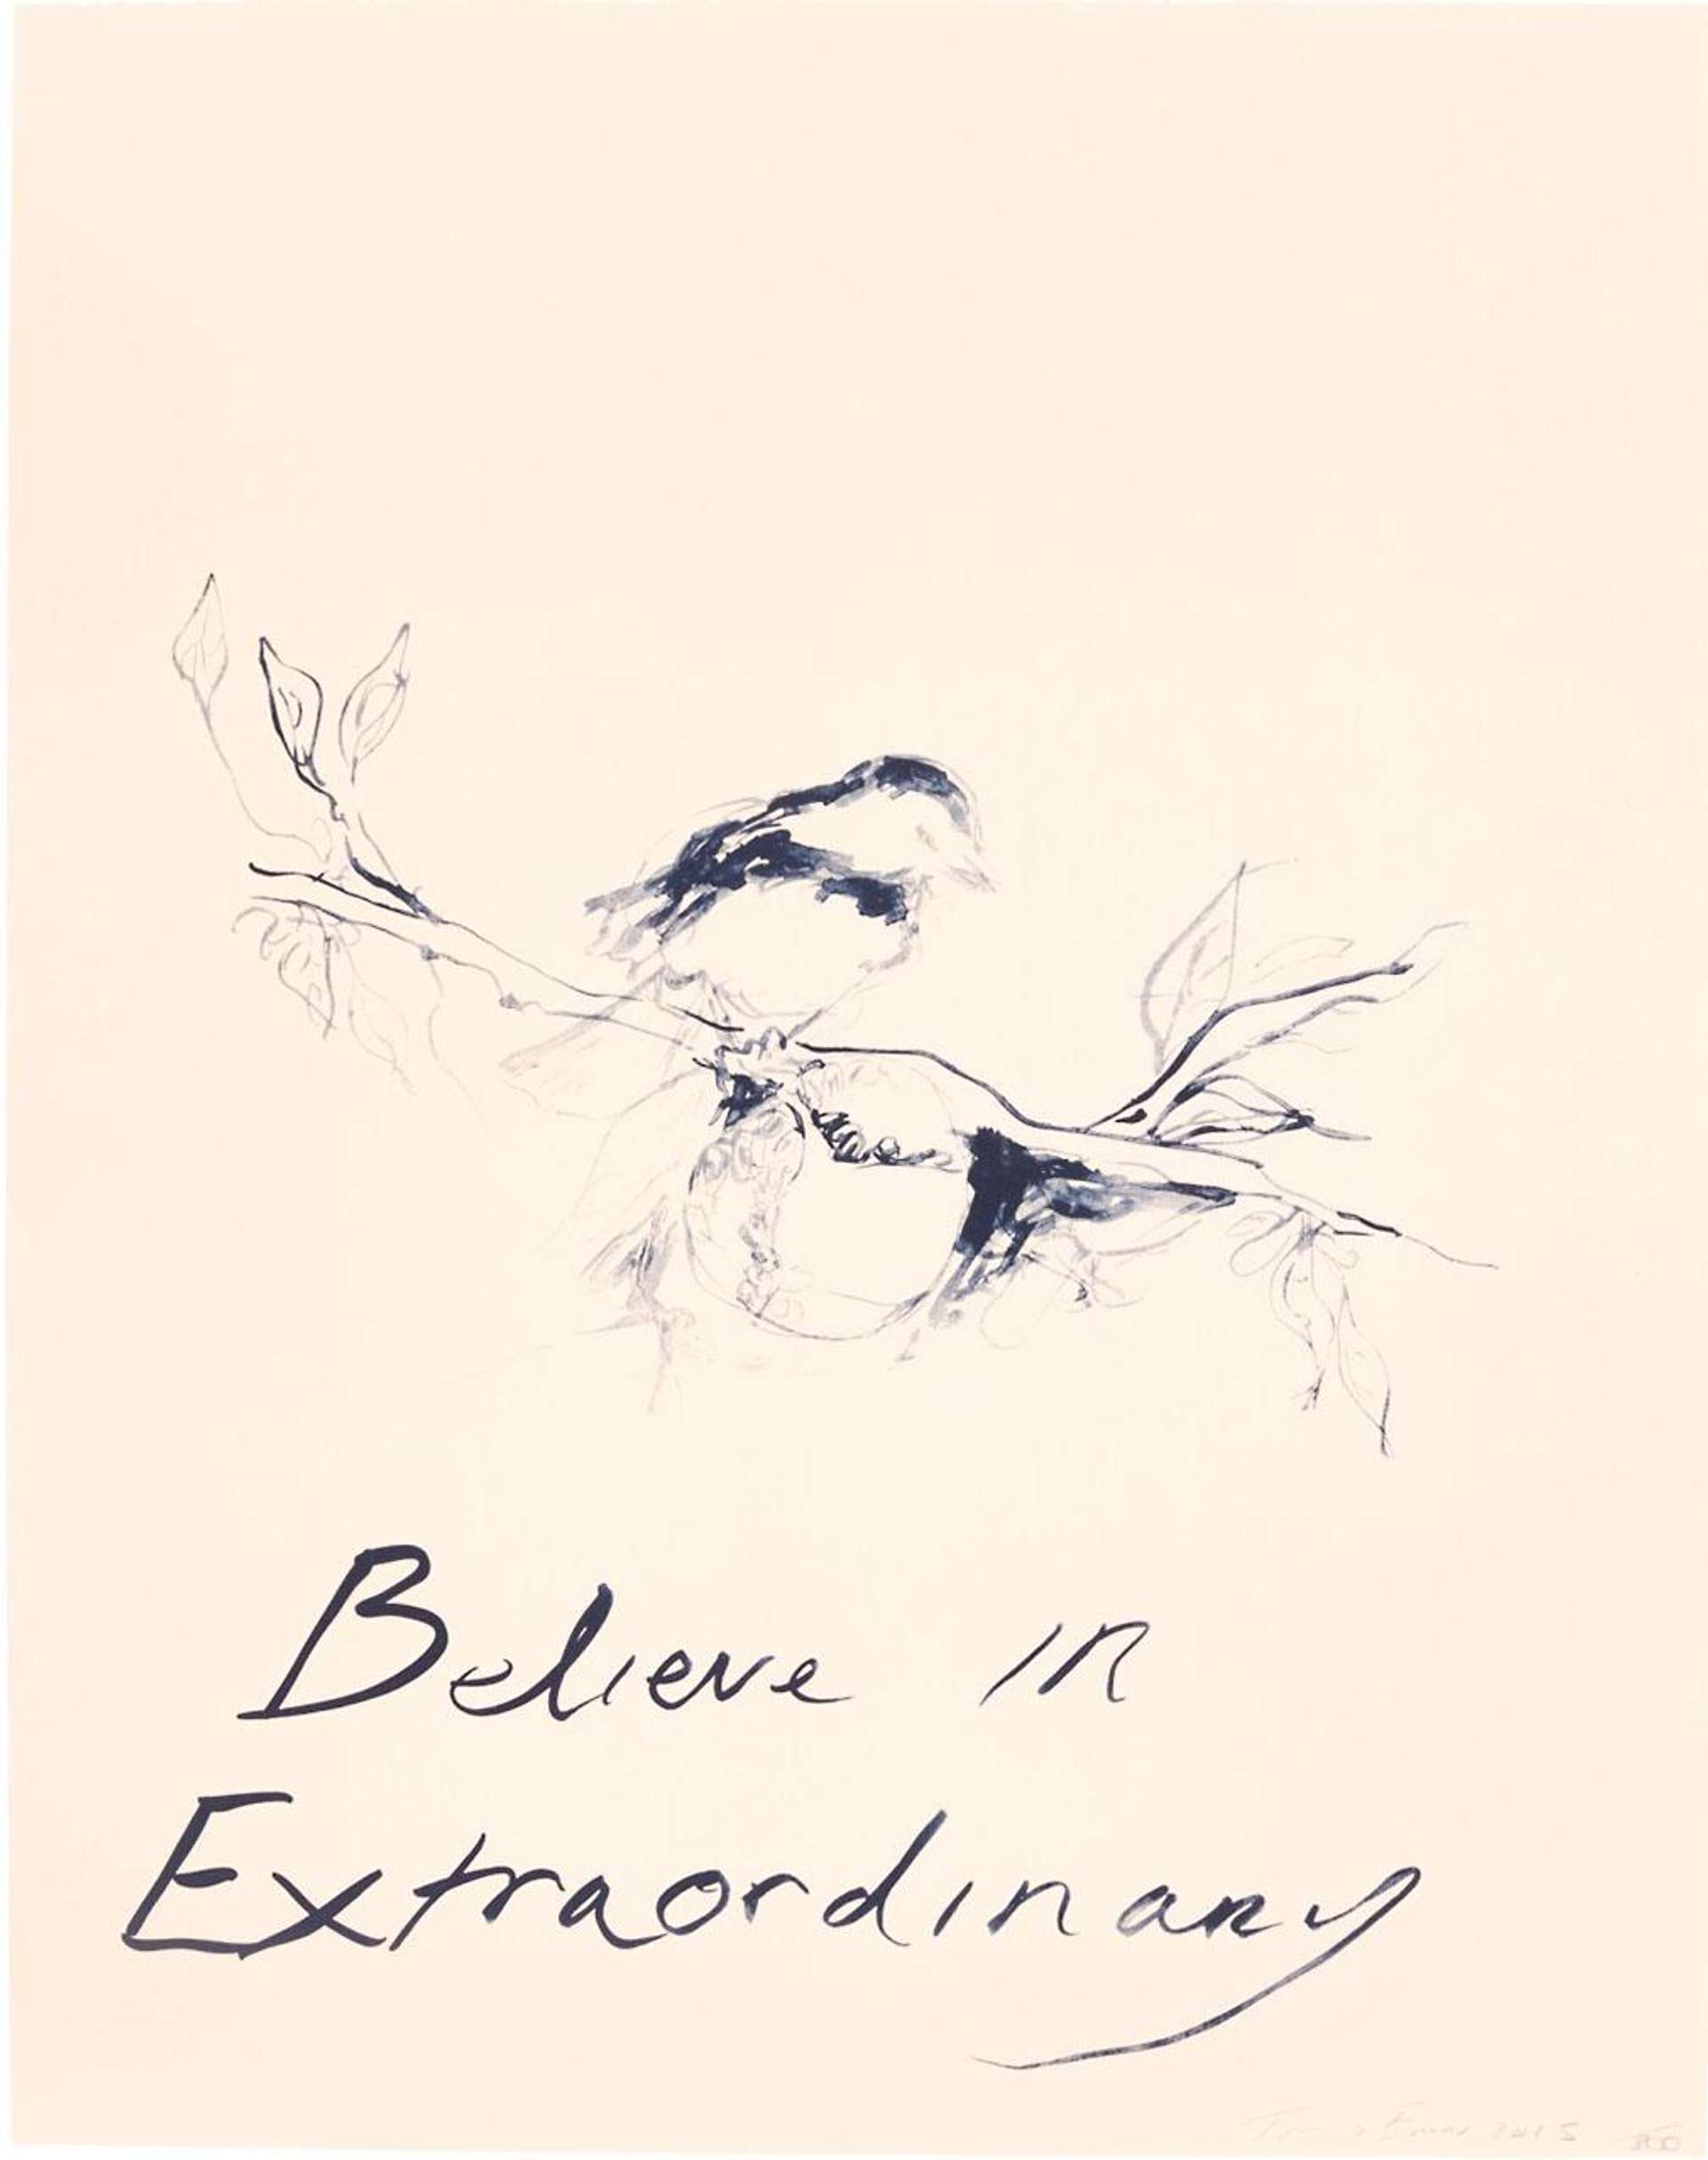 Believe In Extraordinary was executed as a lithograph in oxford blue in 2015. Emin here captures an inky blue robin perched on a leafy branch, symbolising new beginnings and awakenings. The scene is punctuated by the work’s title inscribed in Emin's handwriting below.